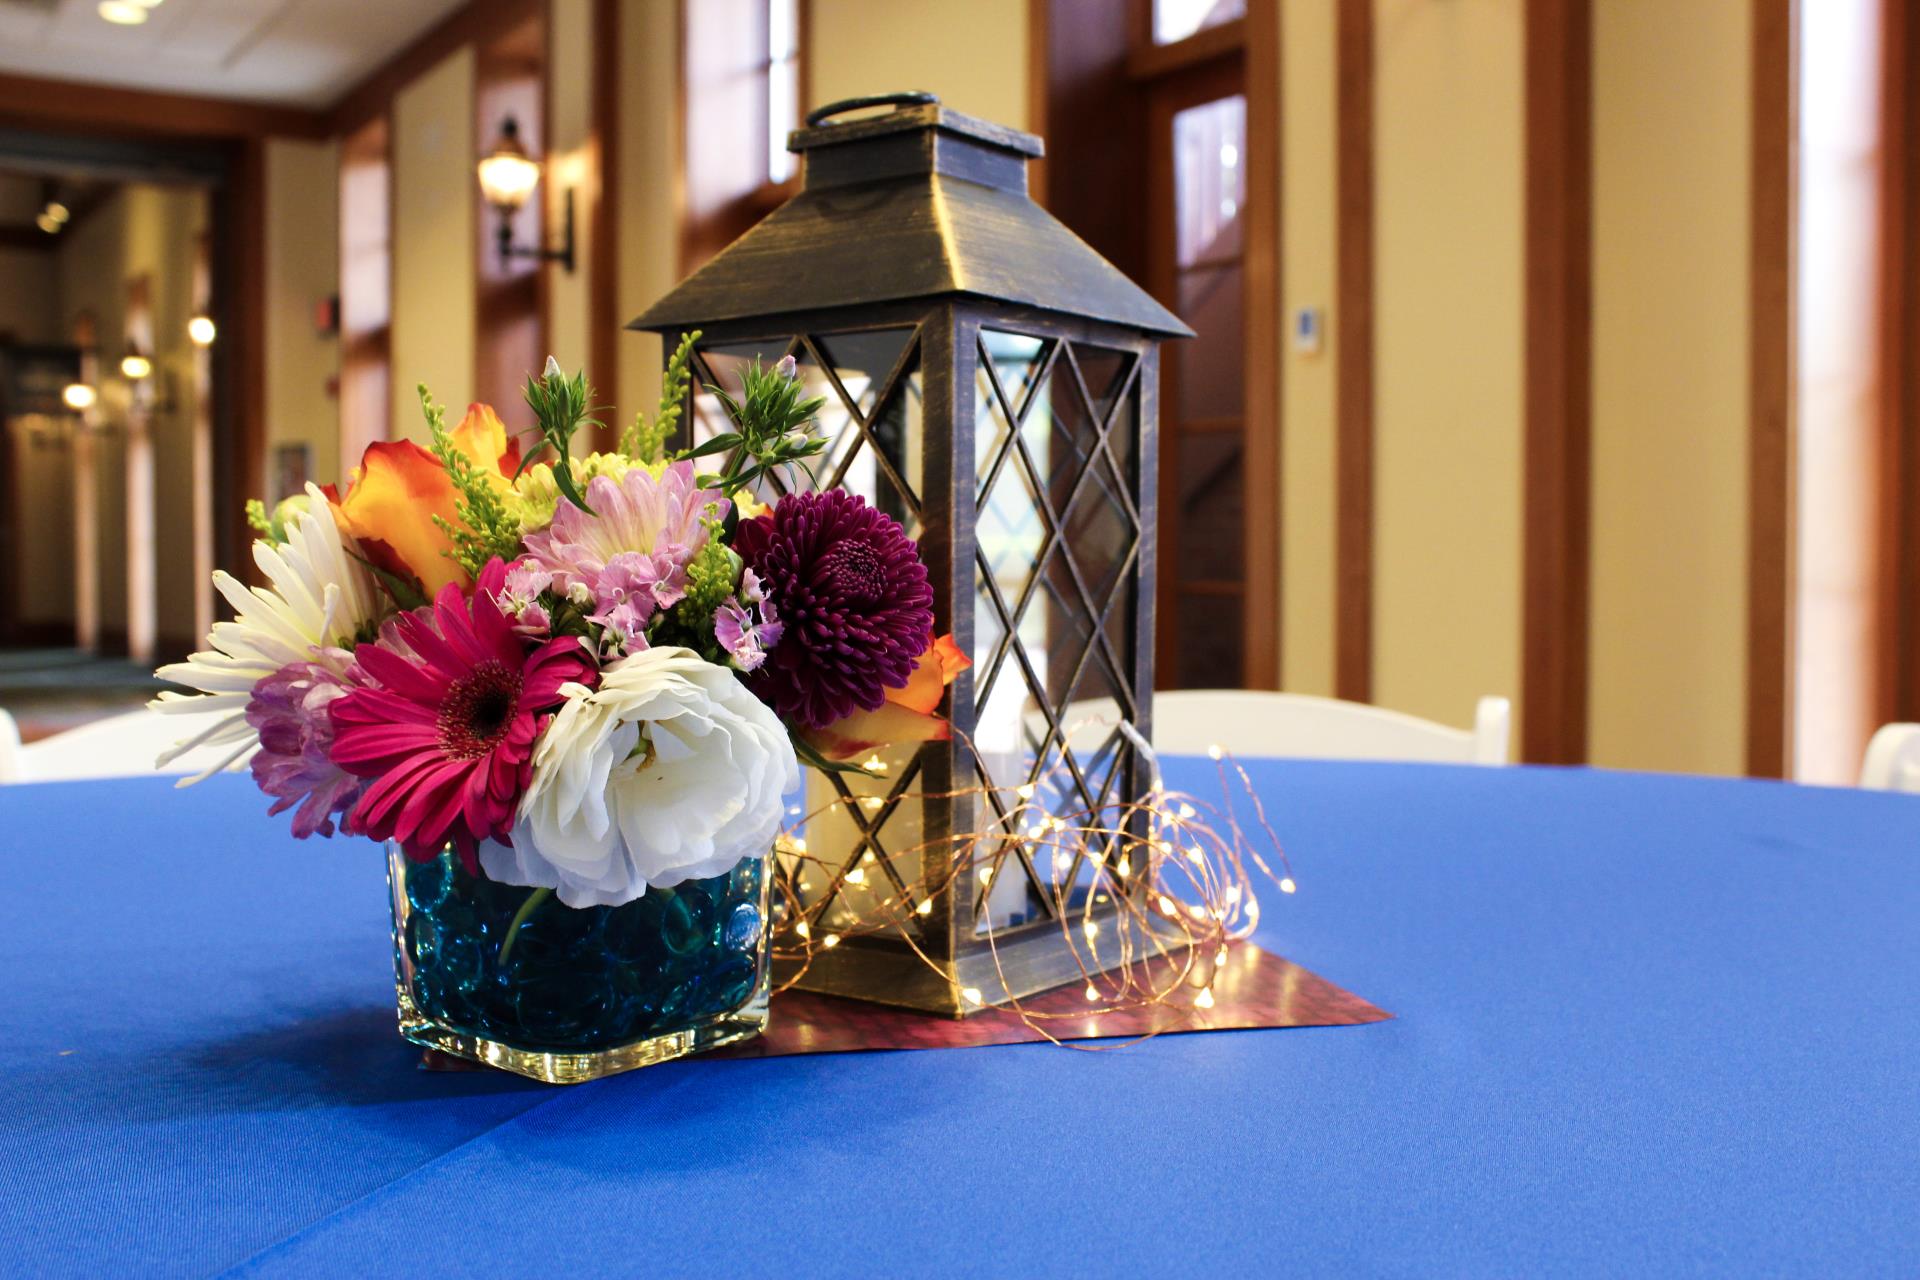 An antique lantern and floral arrangement on a table